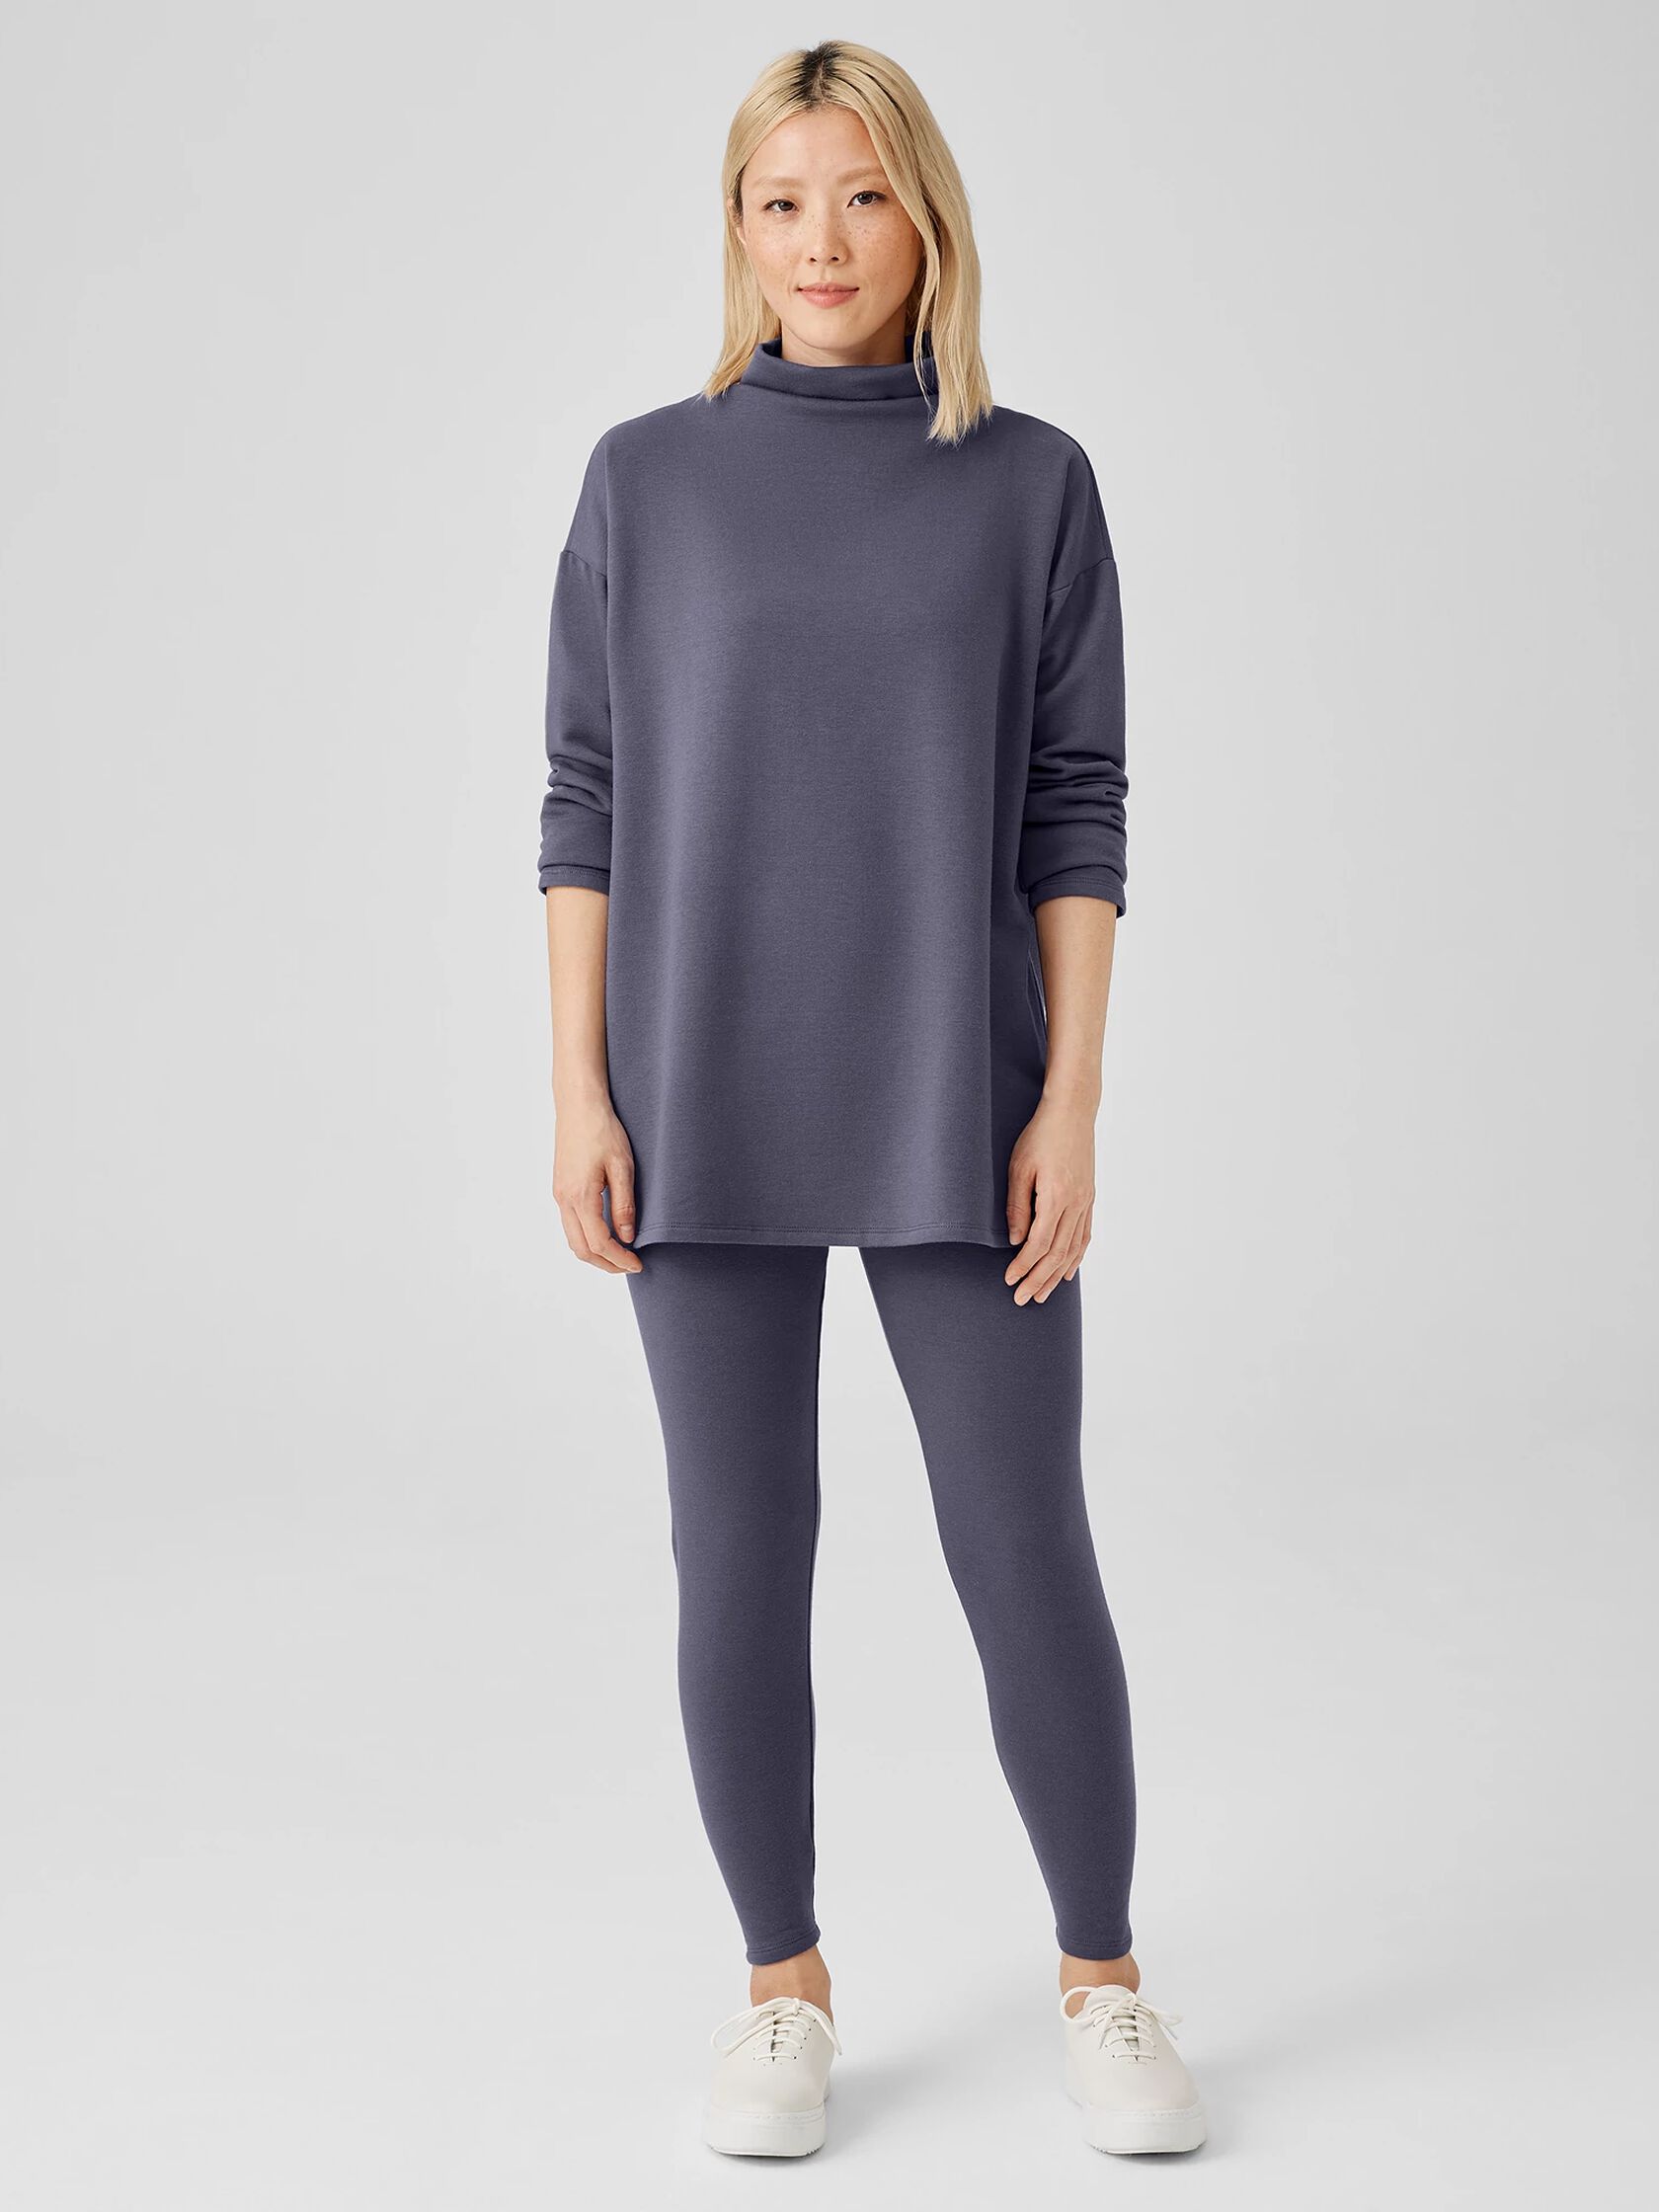 Eileen Fisher Asymmetrical Poncho & Leather Front Leggings